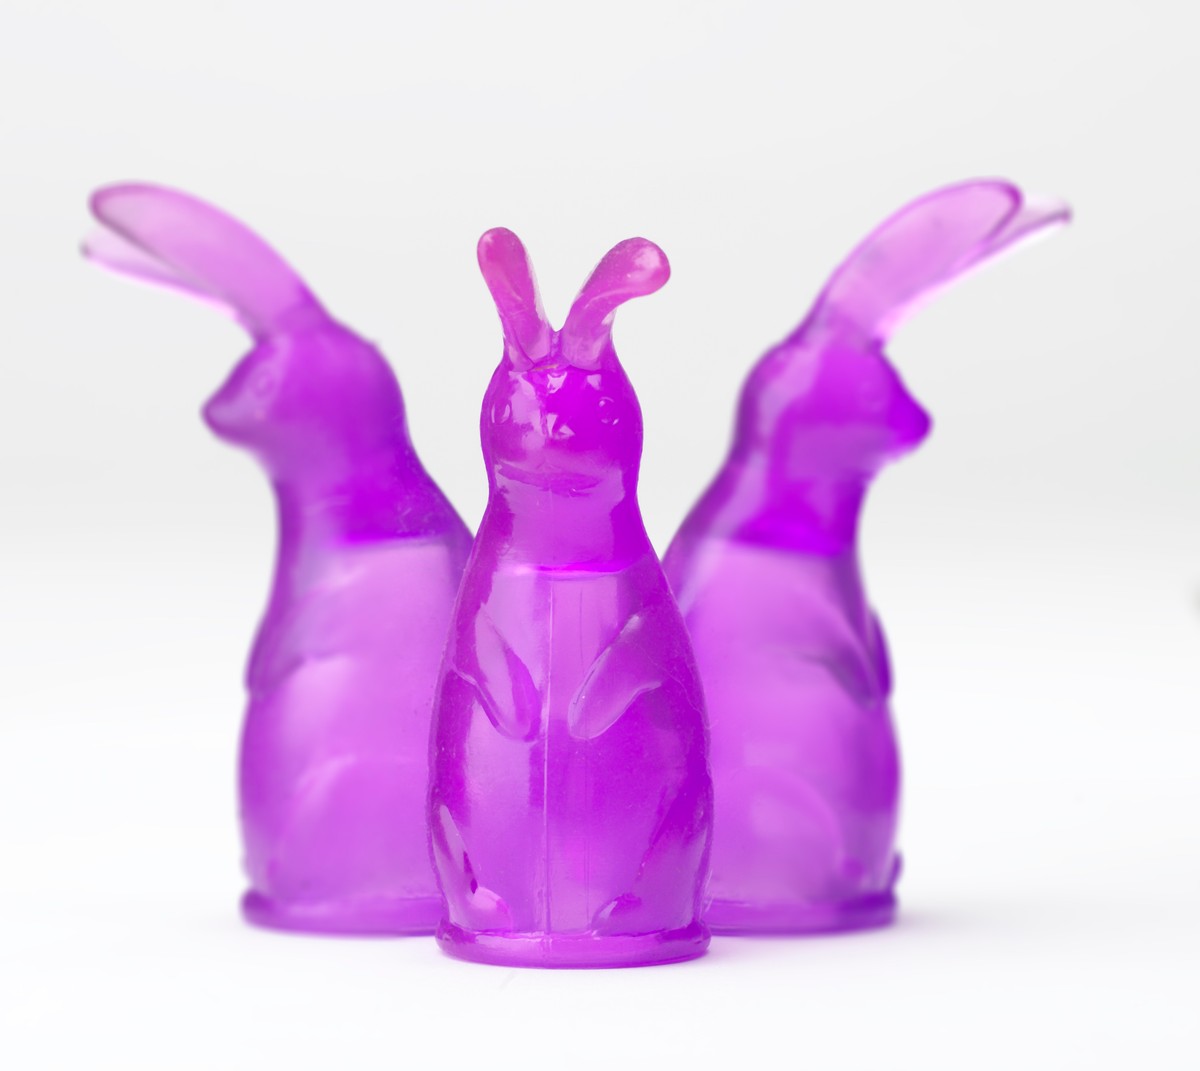 Why Are So Many Sex Toys Shaped Like Animals?